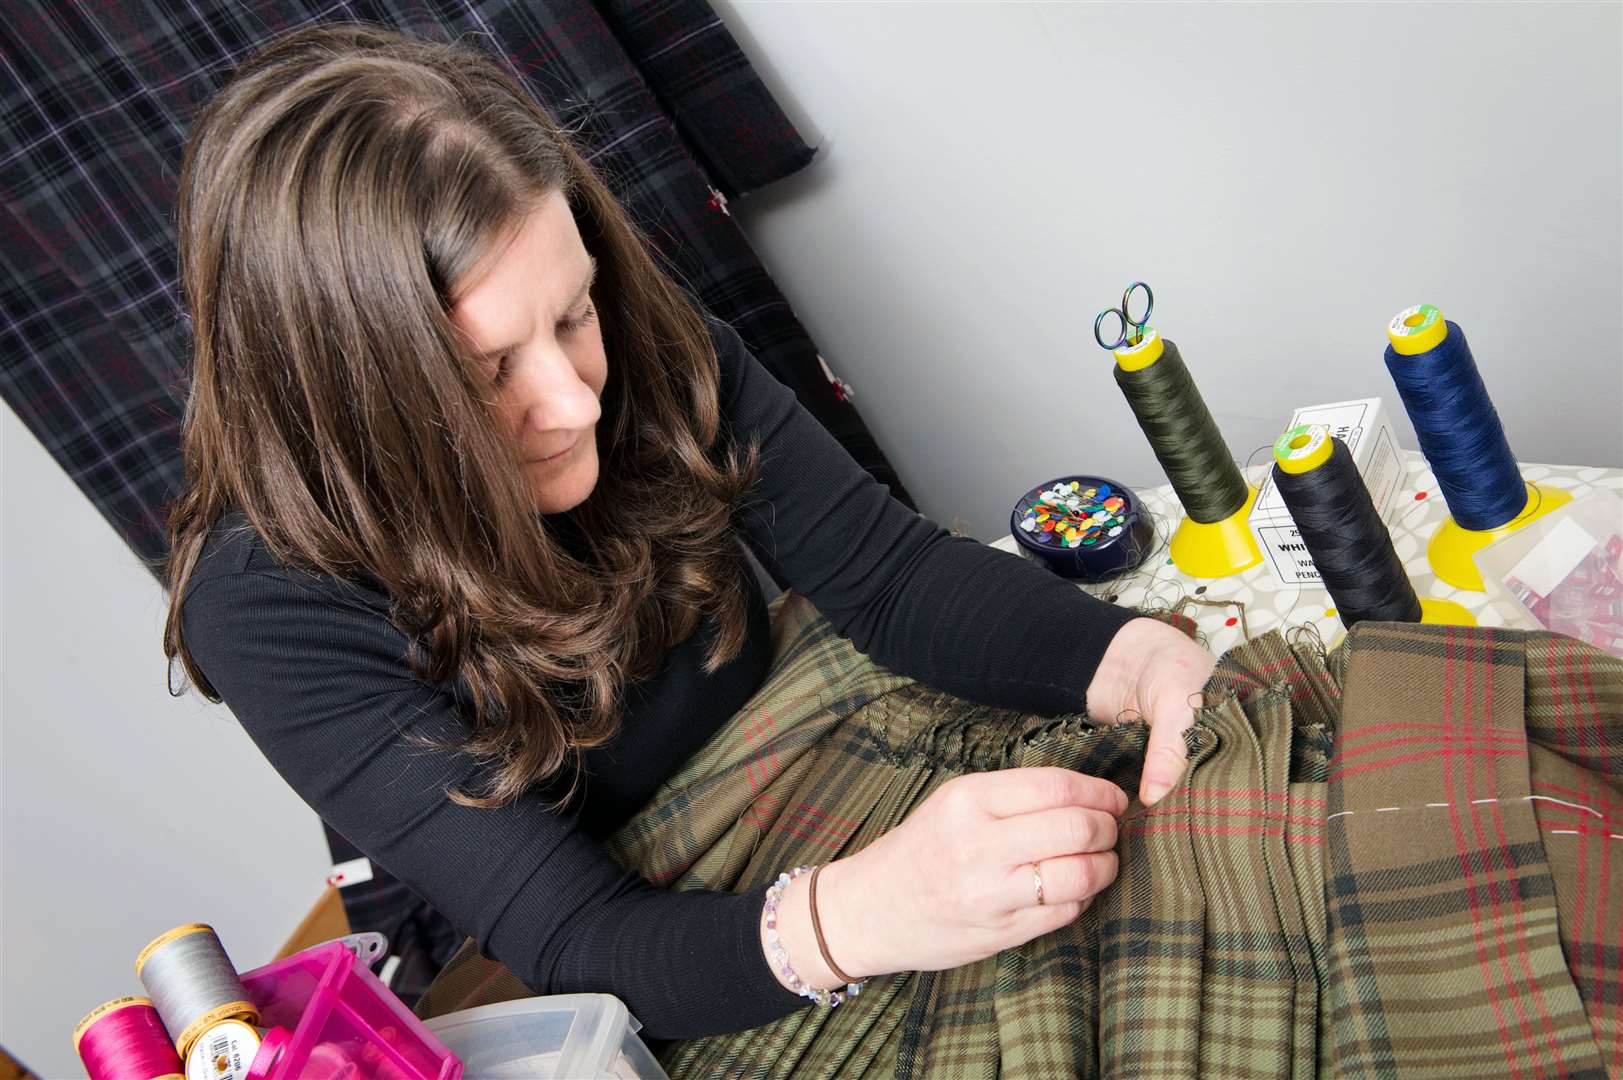 Budding kiltmaker Zoe Farquhar is set to continue her training.